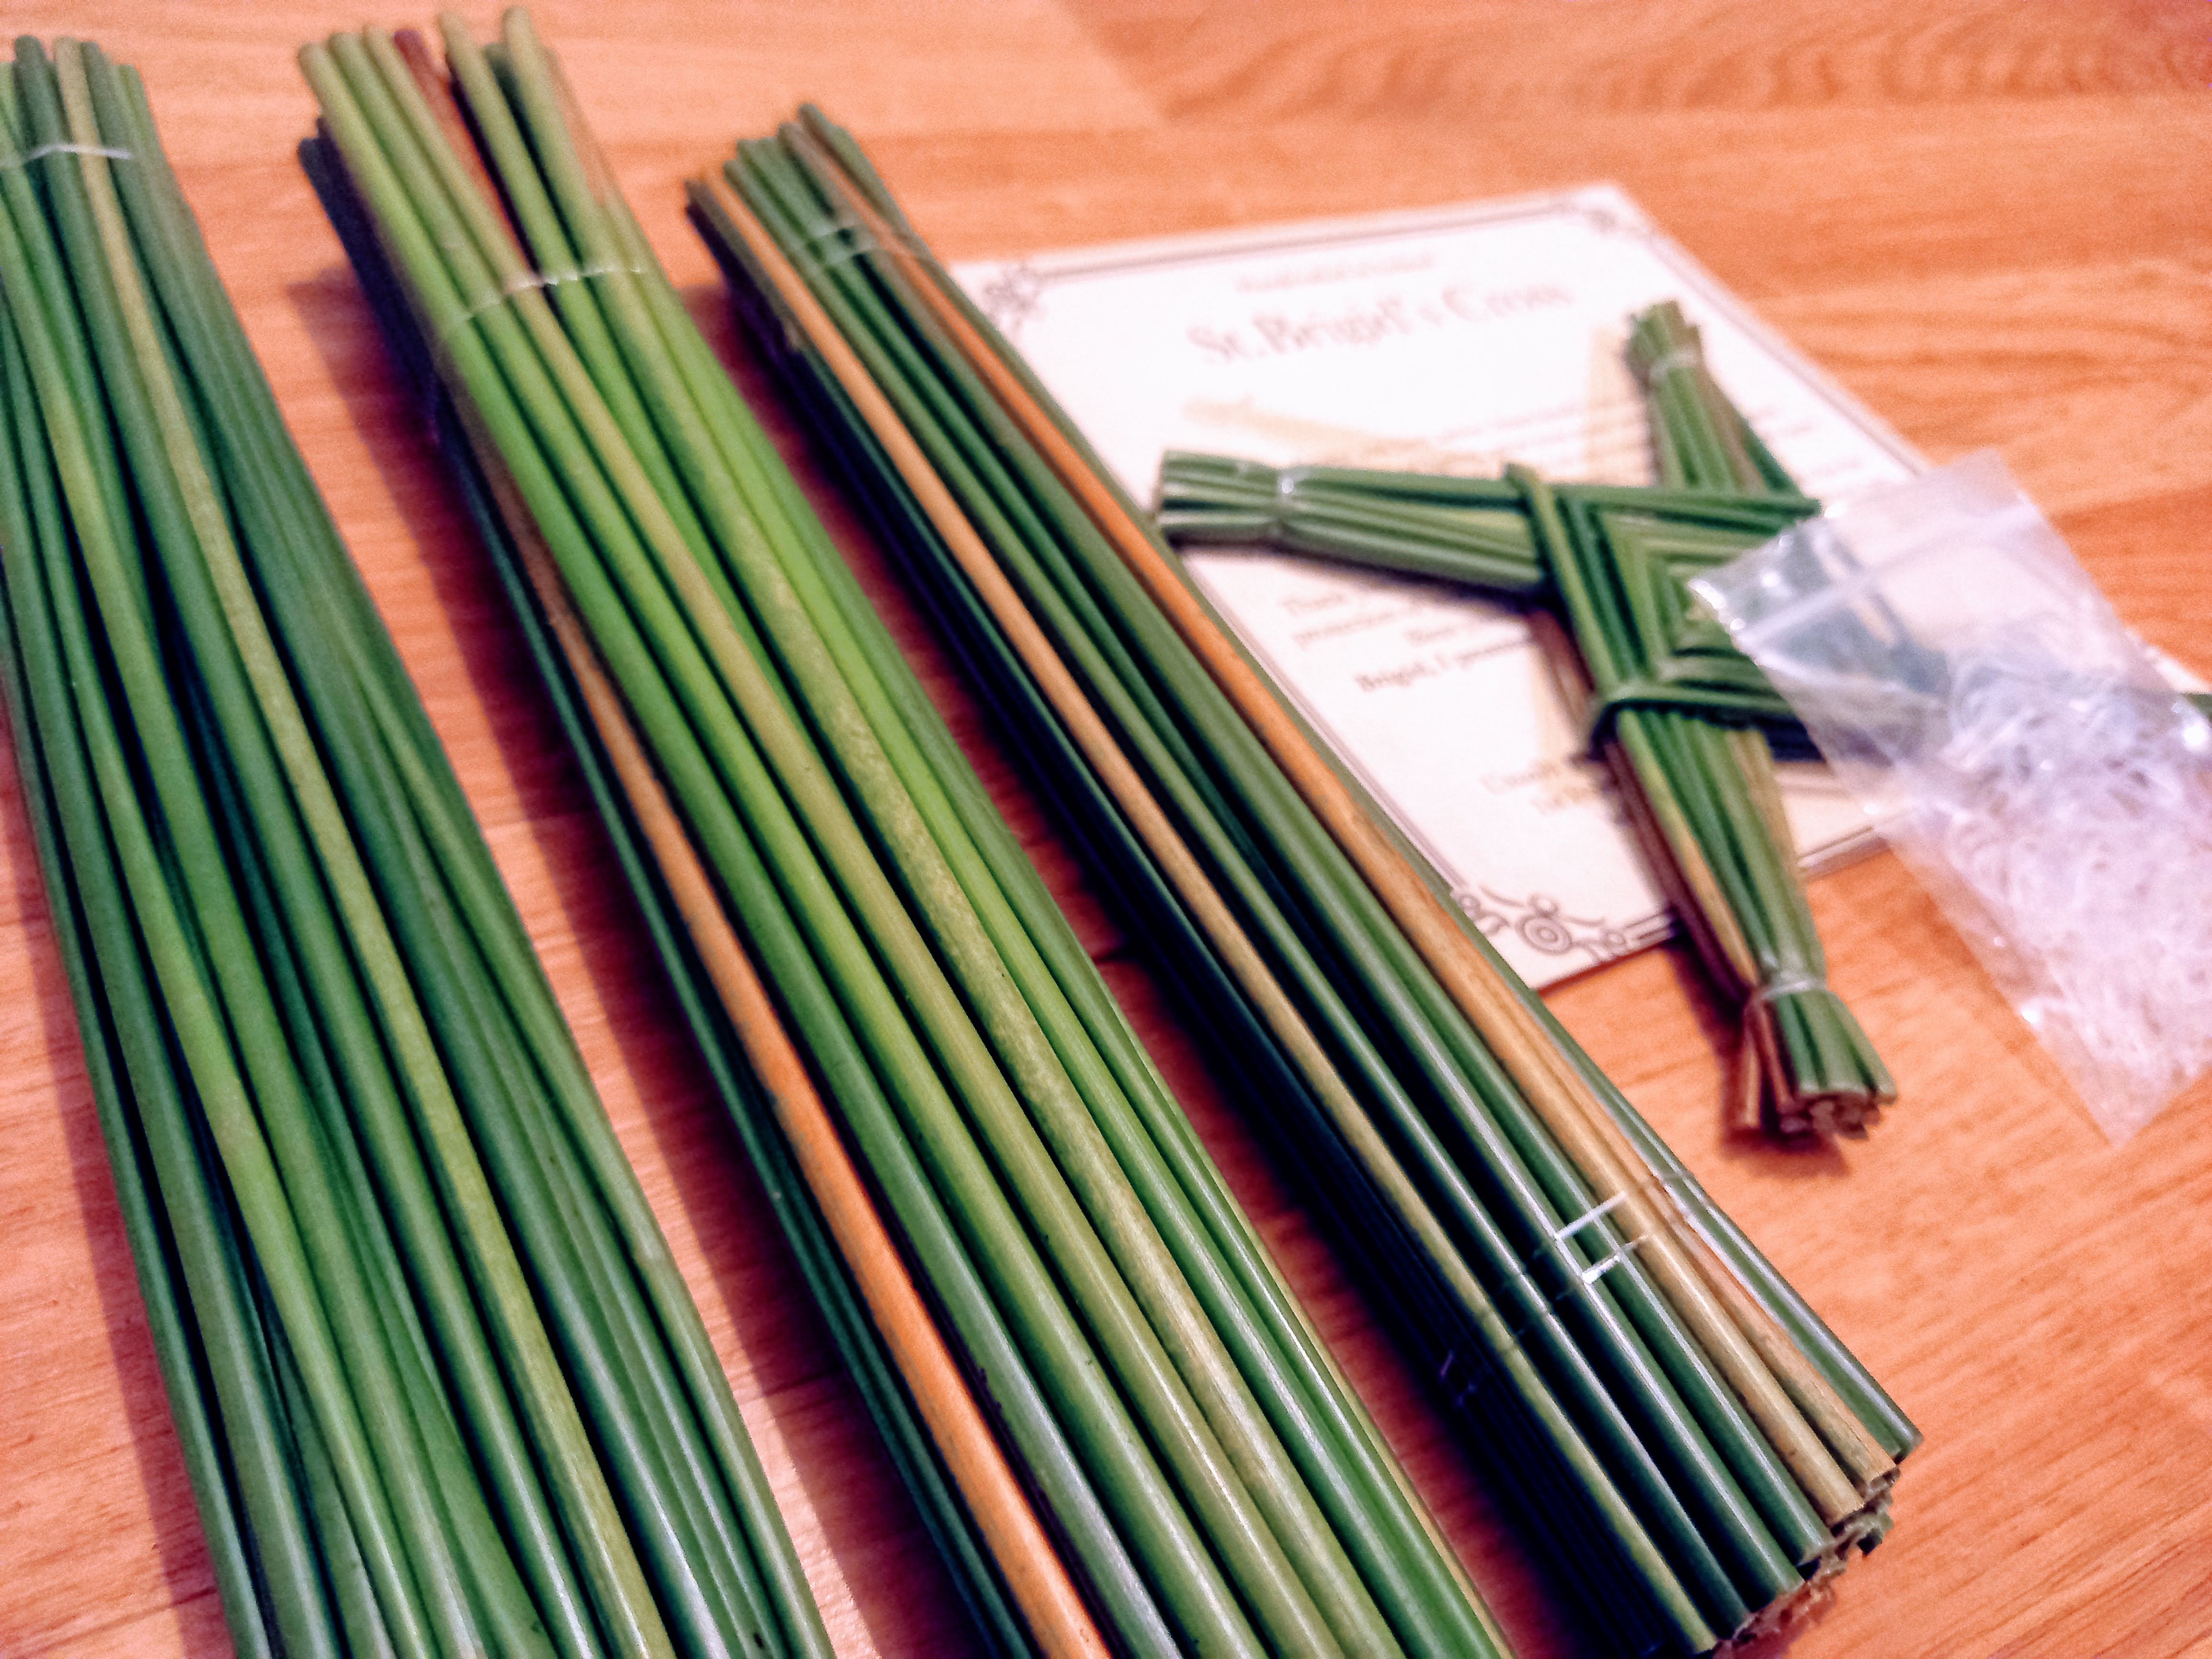 D.I.Y - St. Brigid's Cross - Made by you!